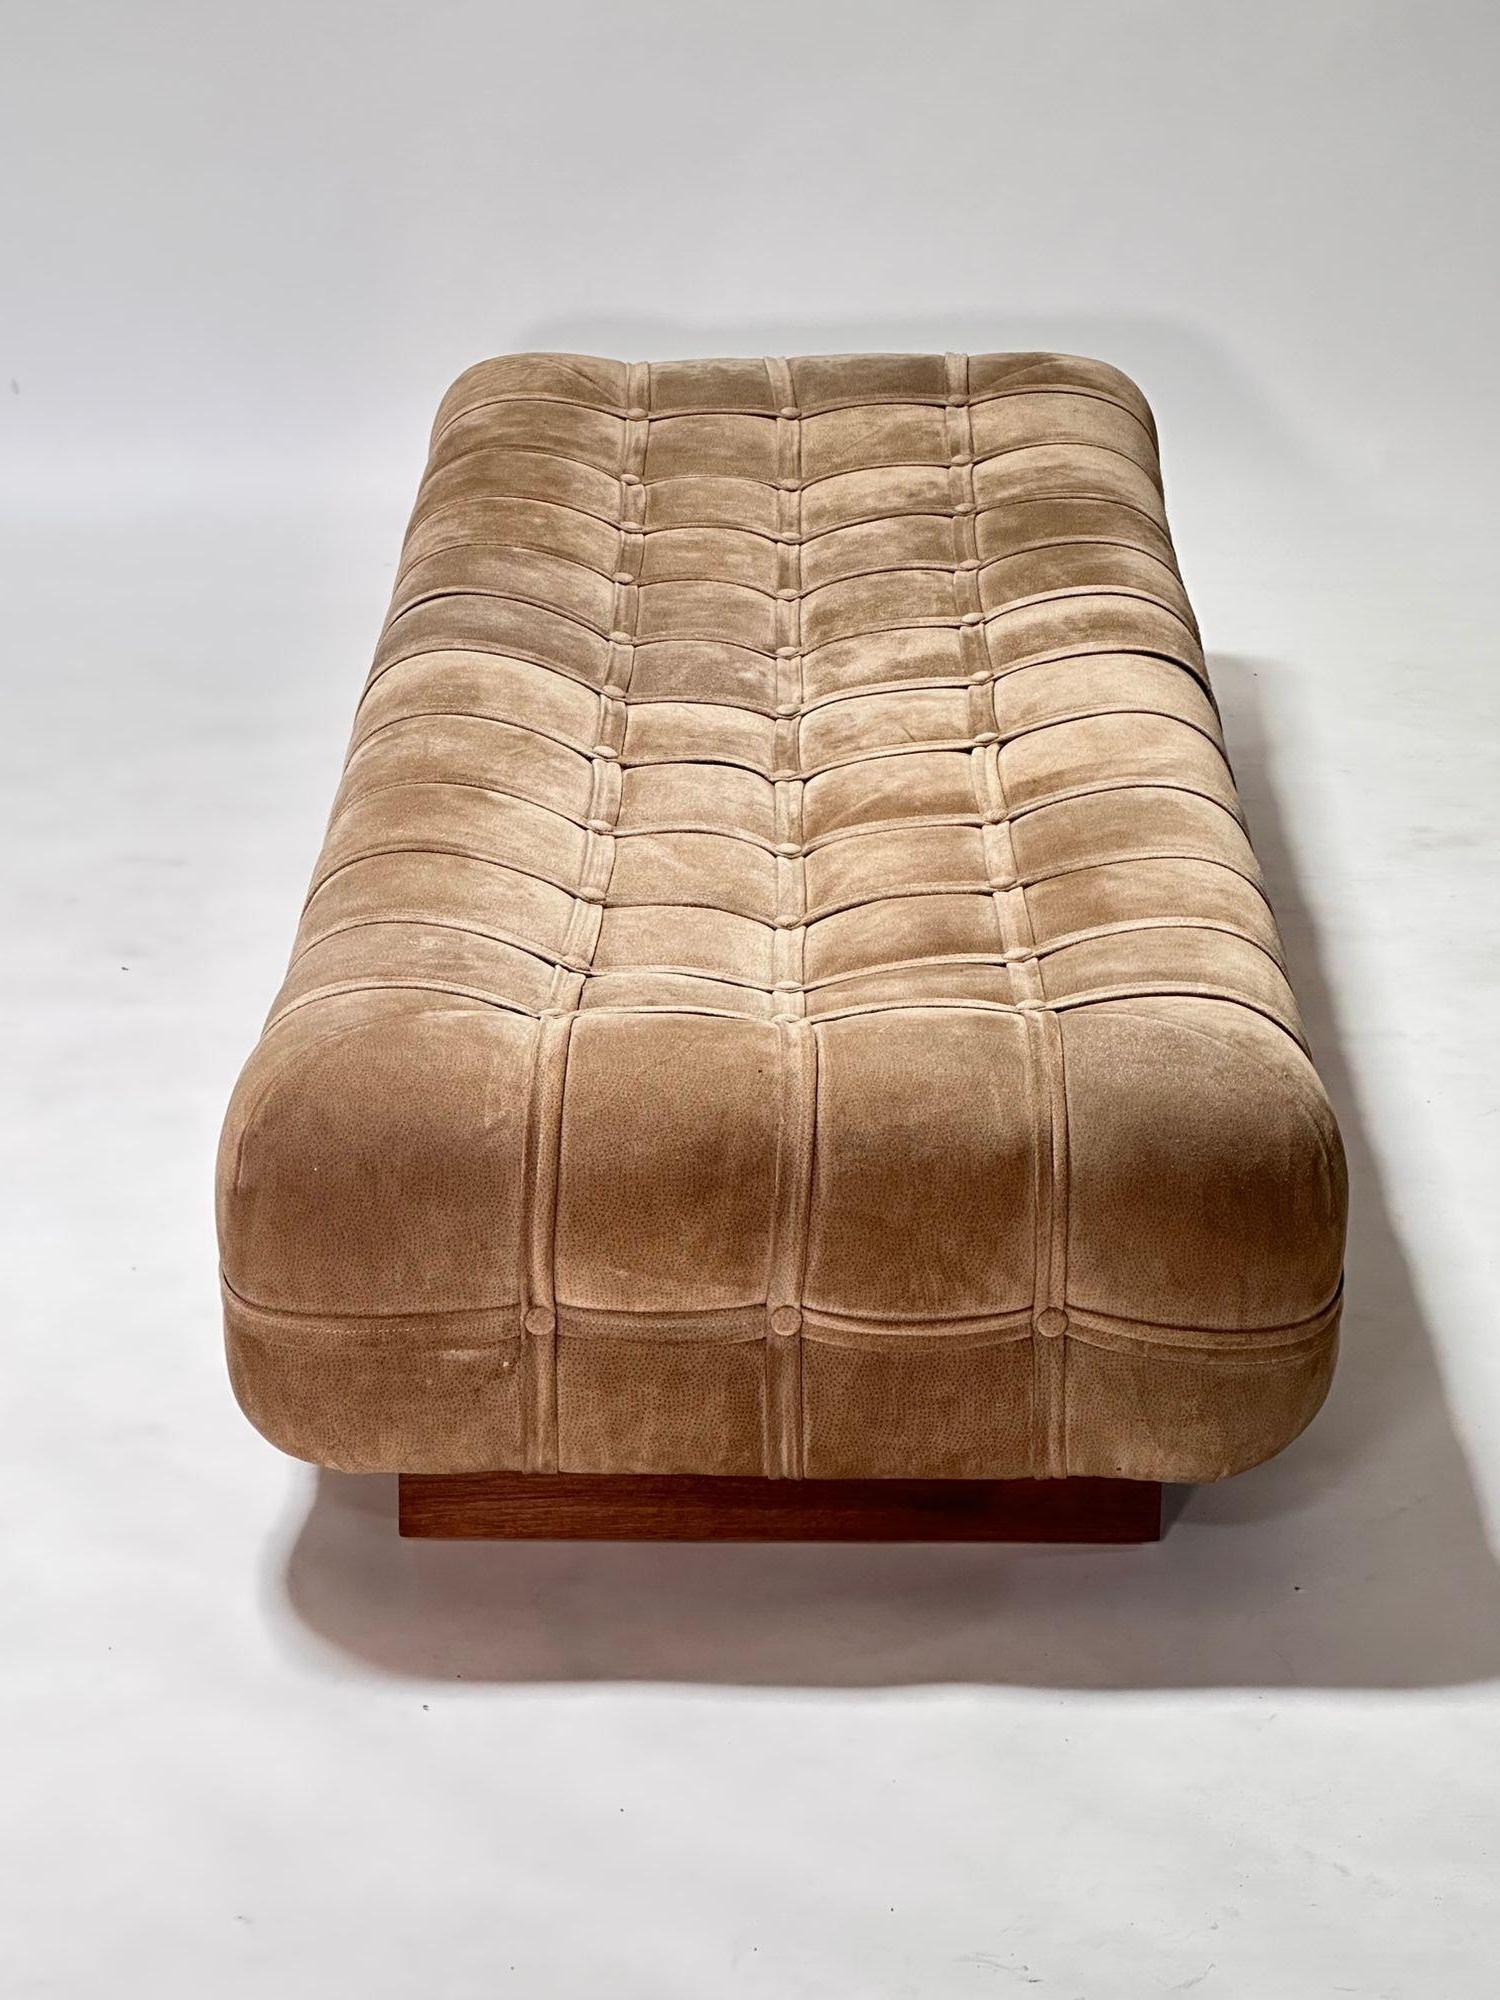 Post-Modern Suede Marshmallow Pouf Bench/ Daybed on Walnut Plinth Base, 1970